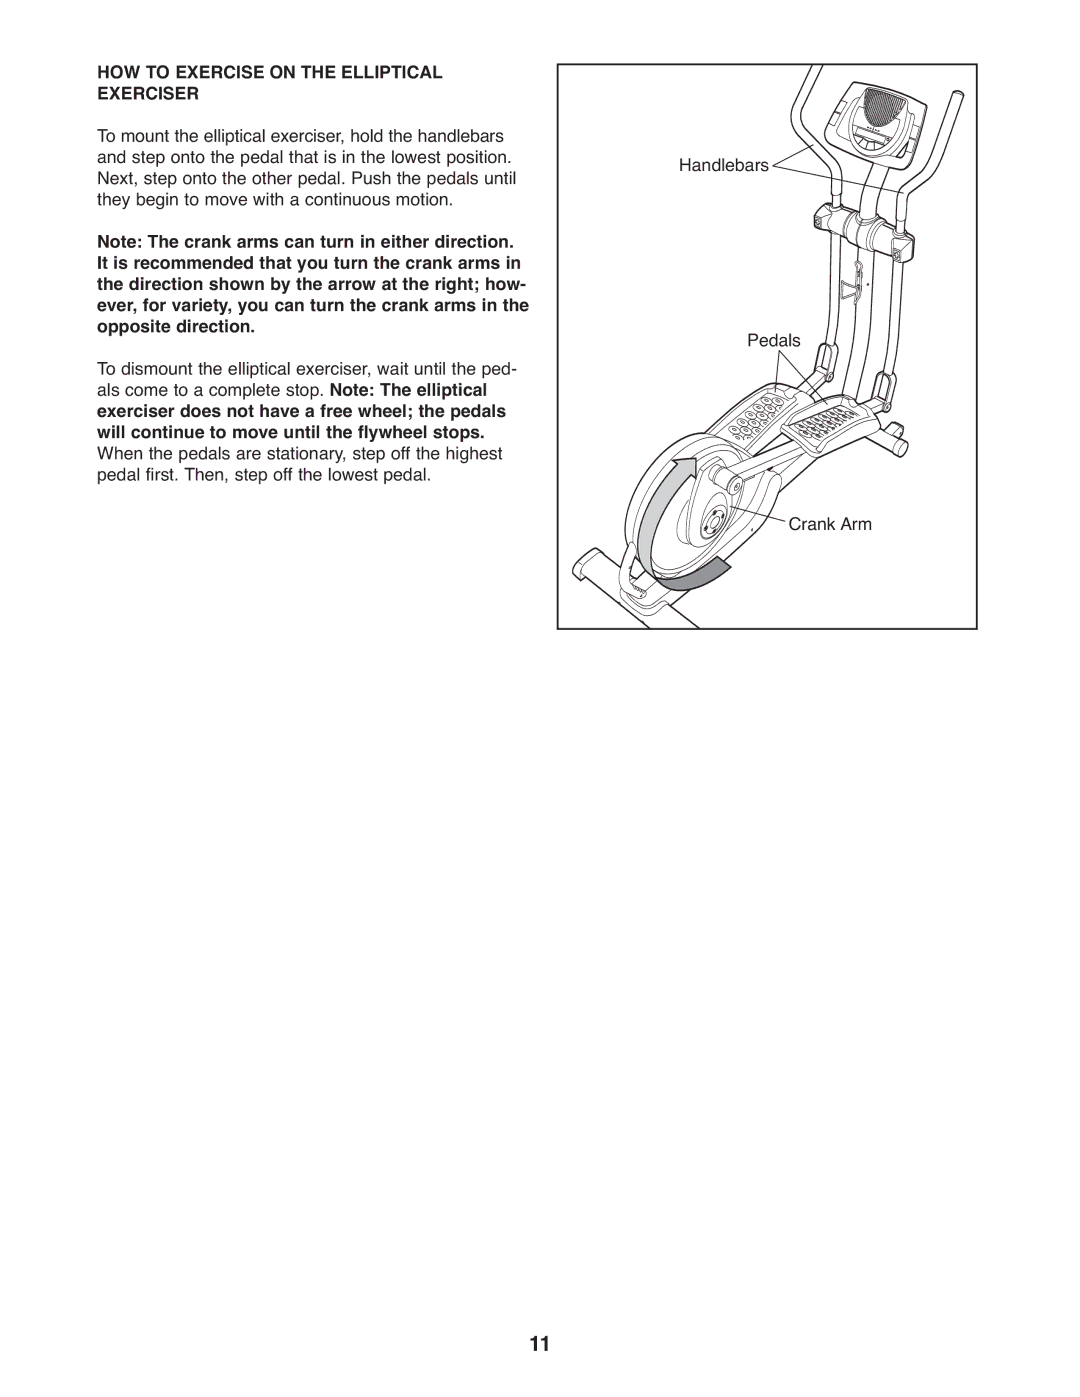 ProForm 831.28544.2 user manual HOW to Exercise on the Elliptical Exerciser 